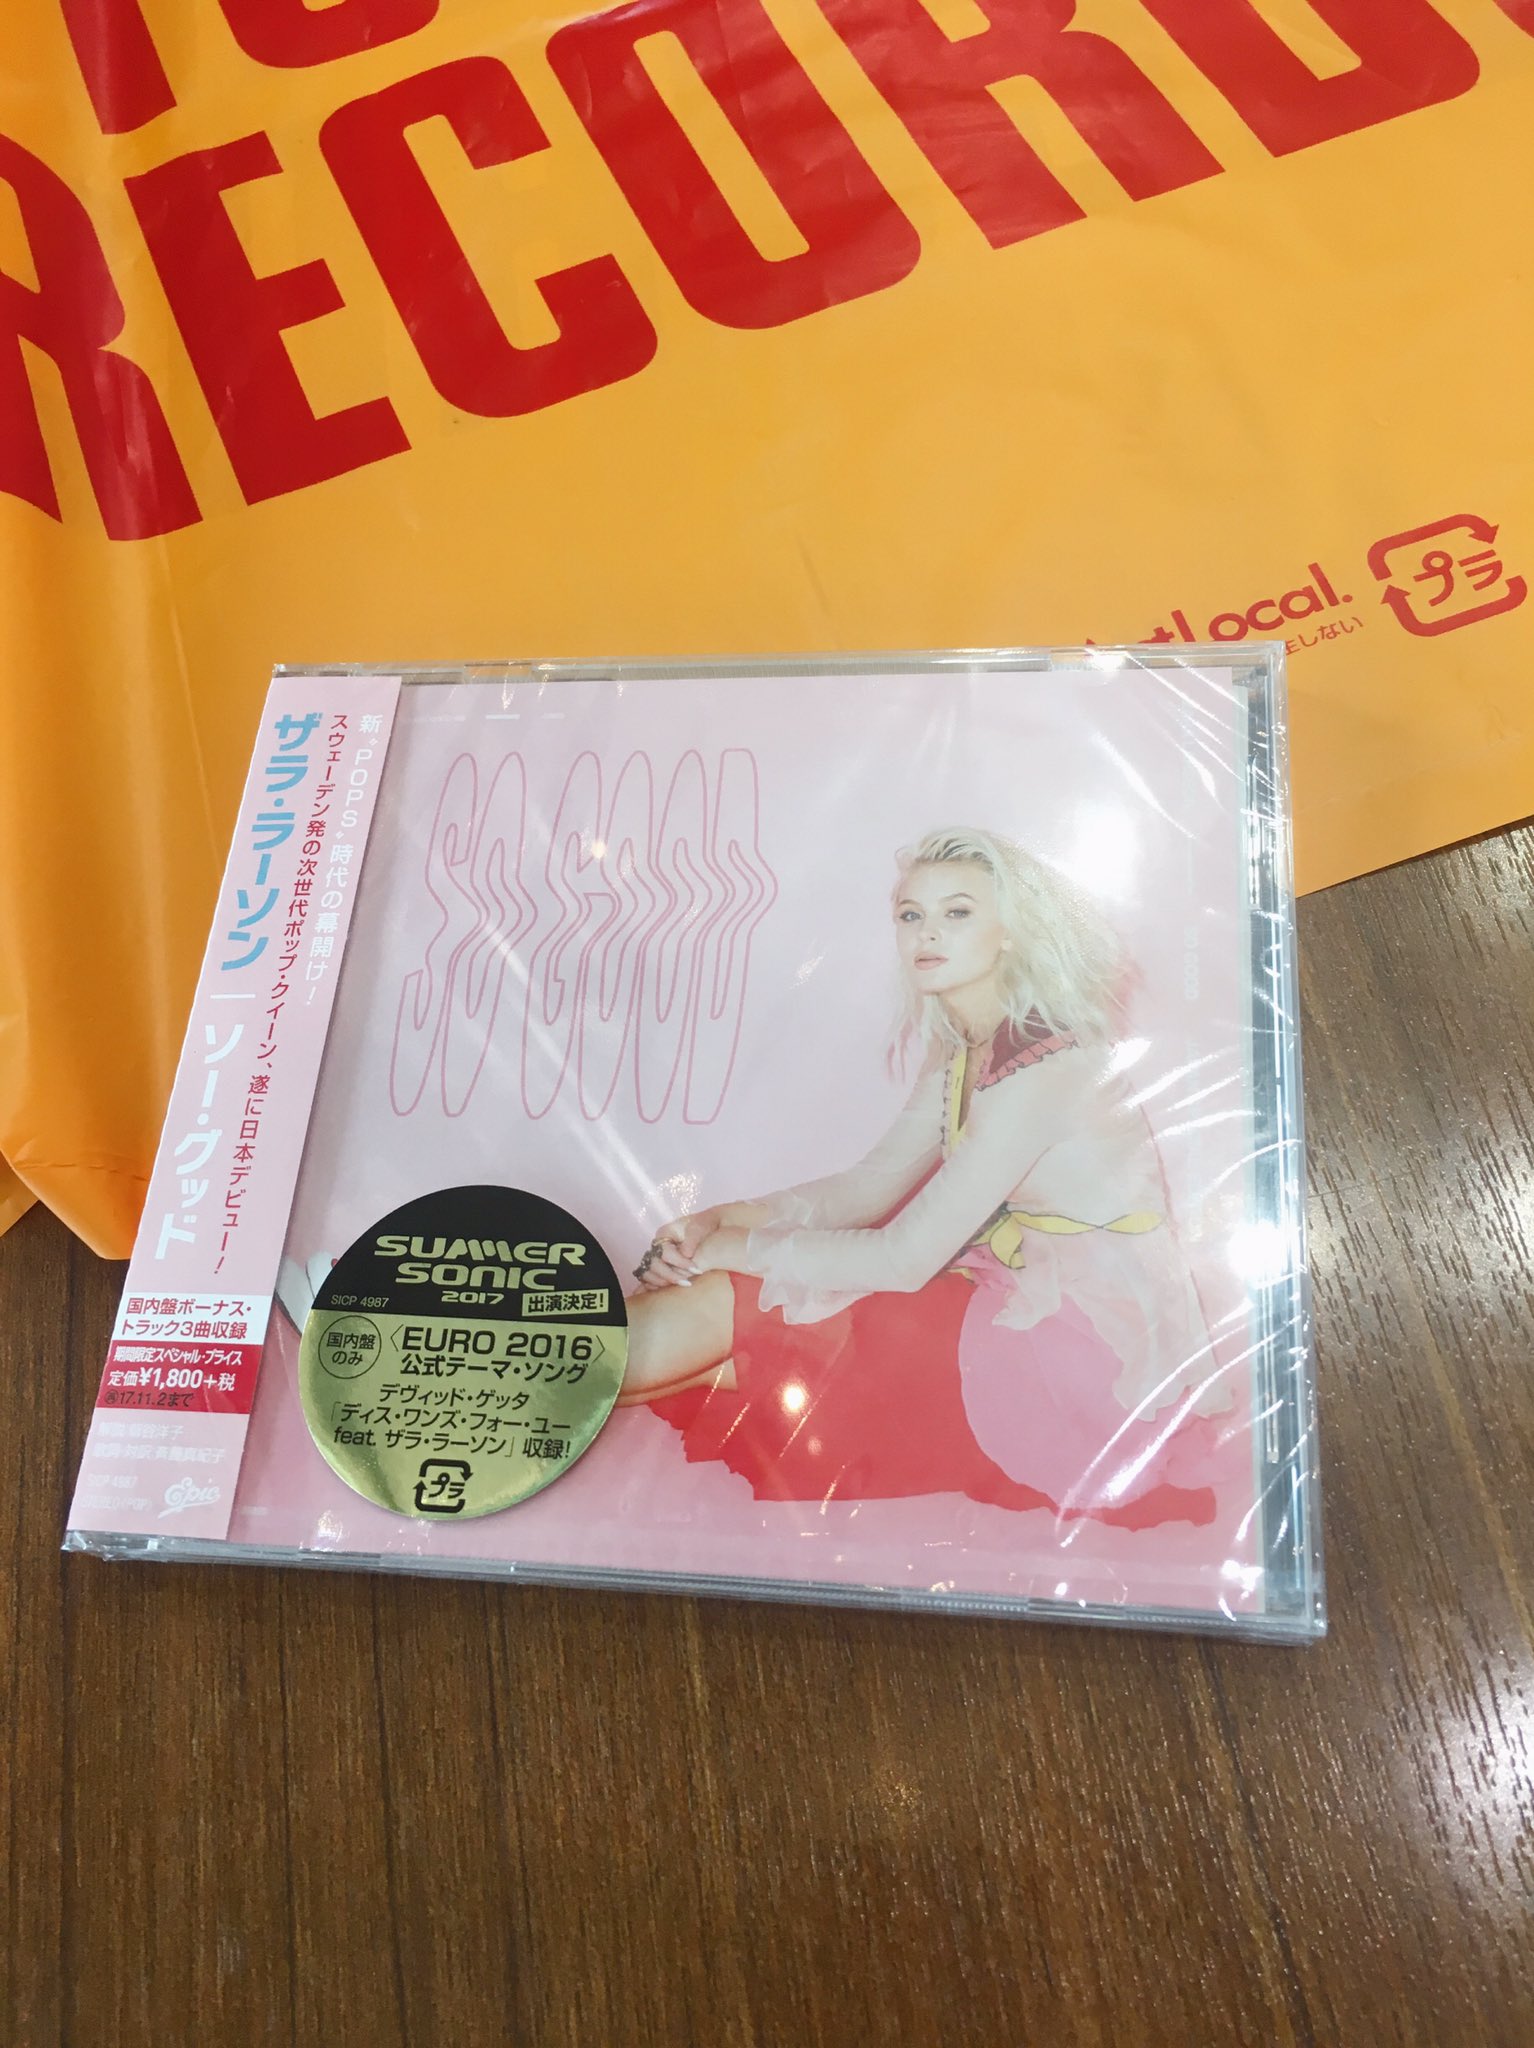 Zara Larsson Japan Here S The Poster From Tower Rock Pop It S So Beautiful Thank You So Much For This Intsonymusicjp Zaralarsson T Co Xp5v3oe5ud